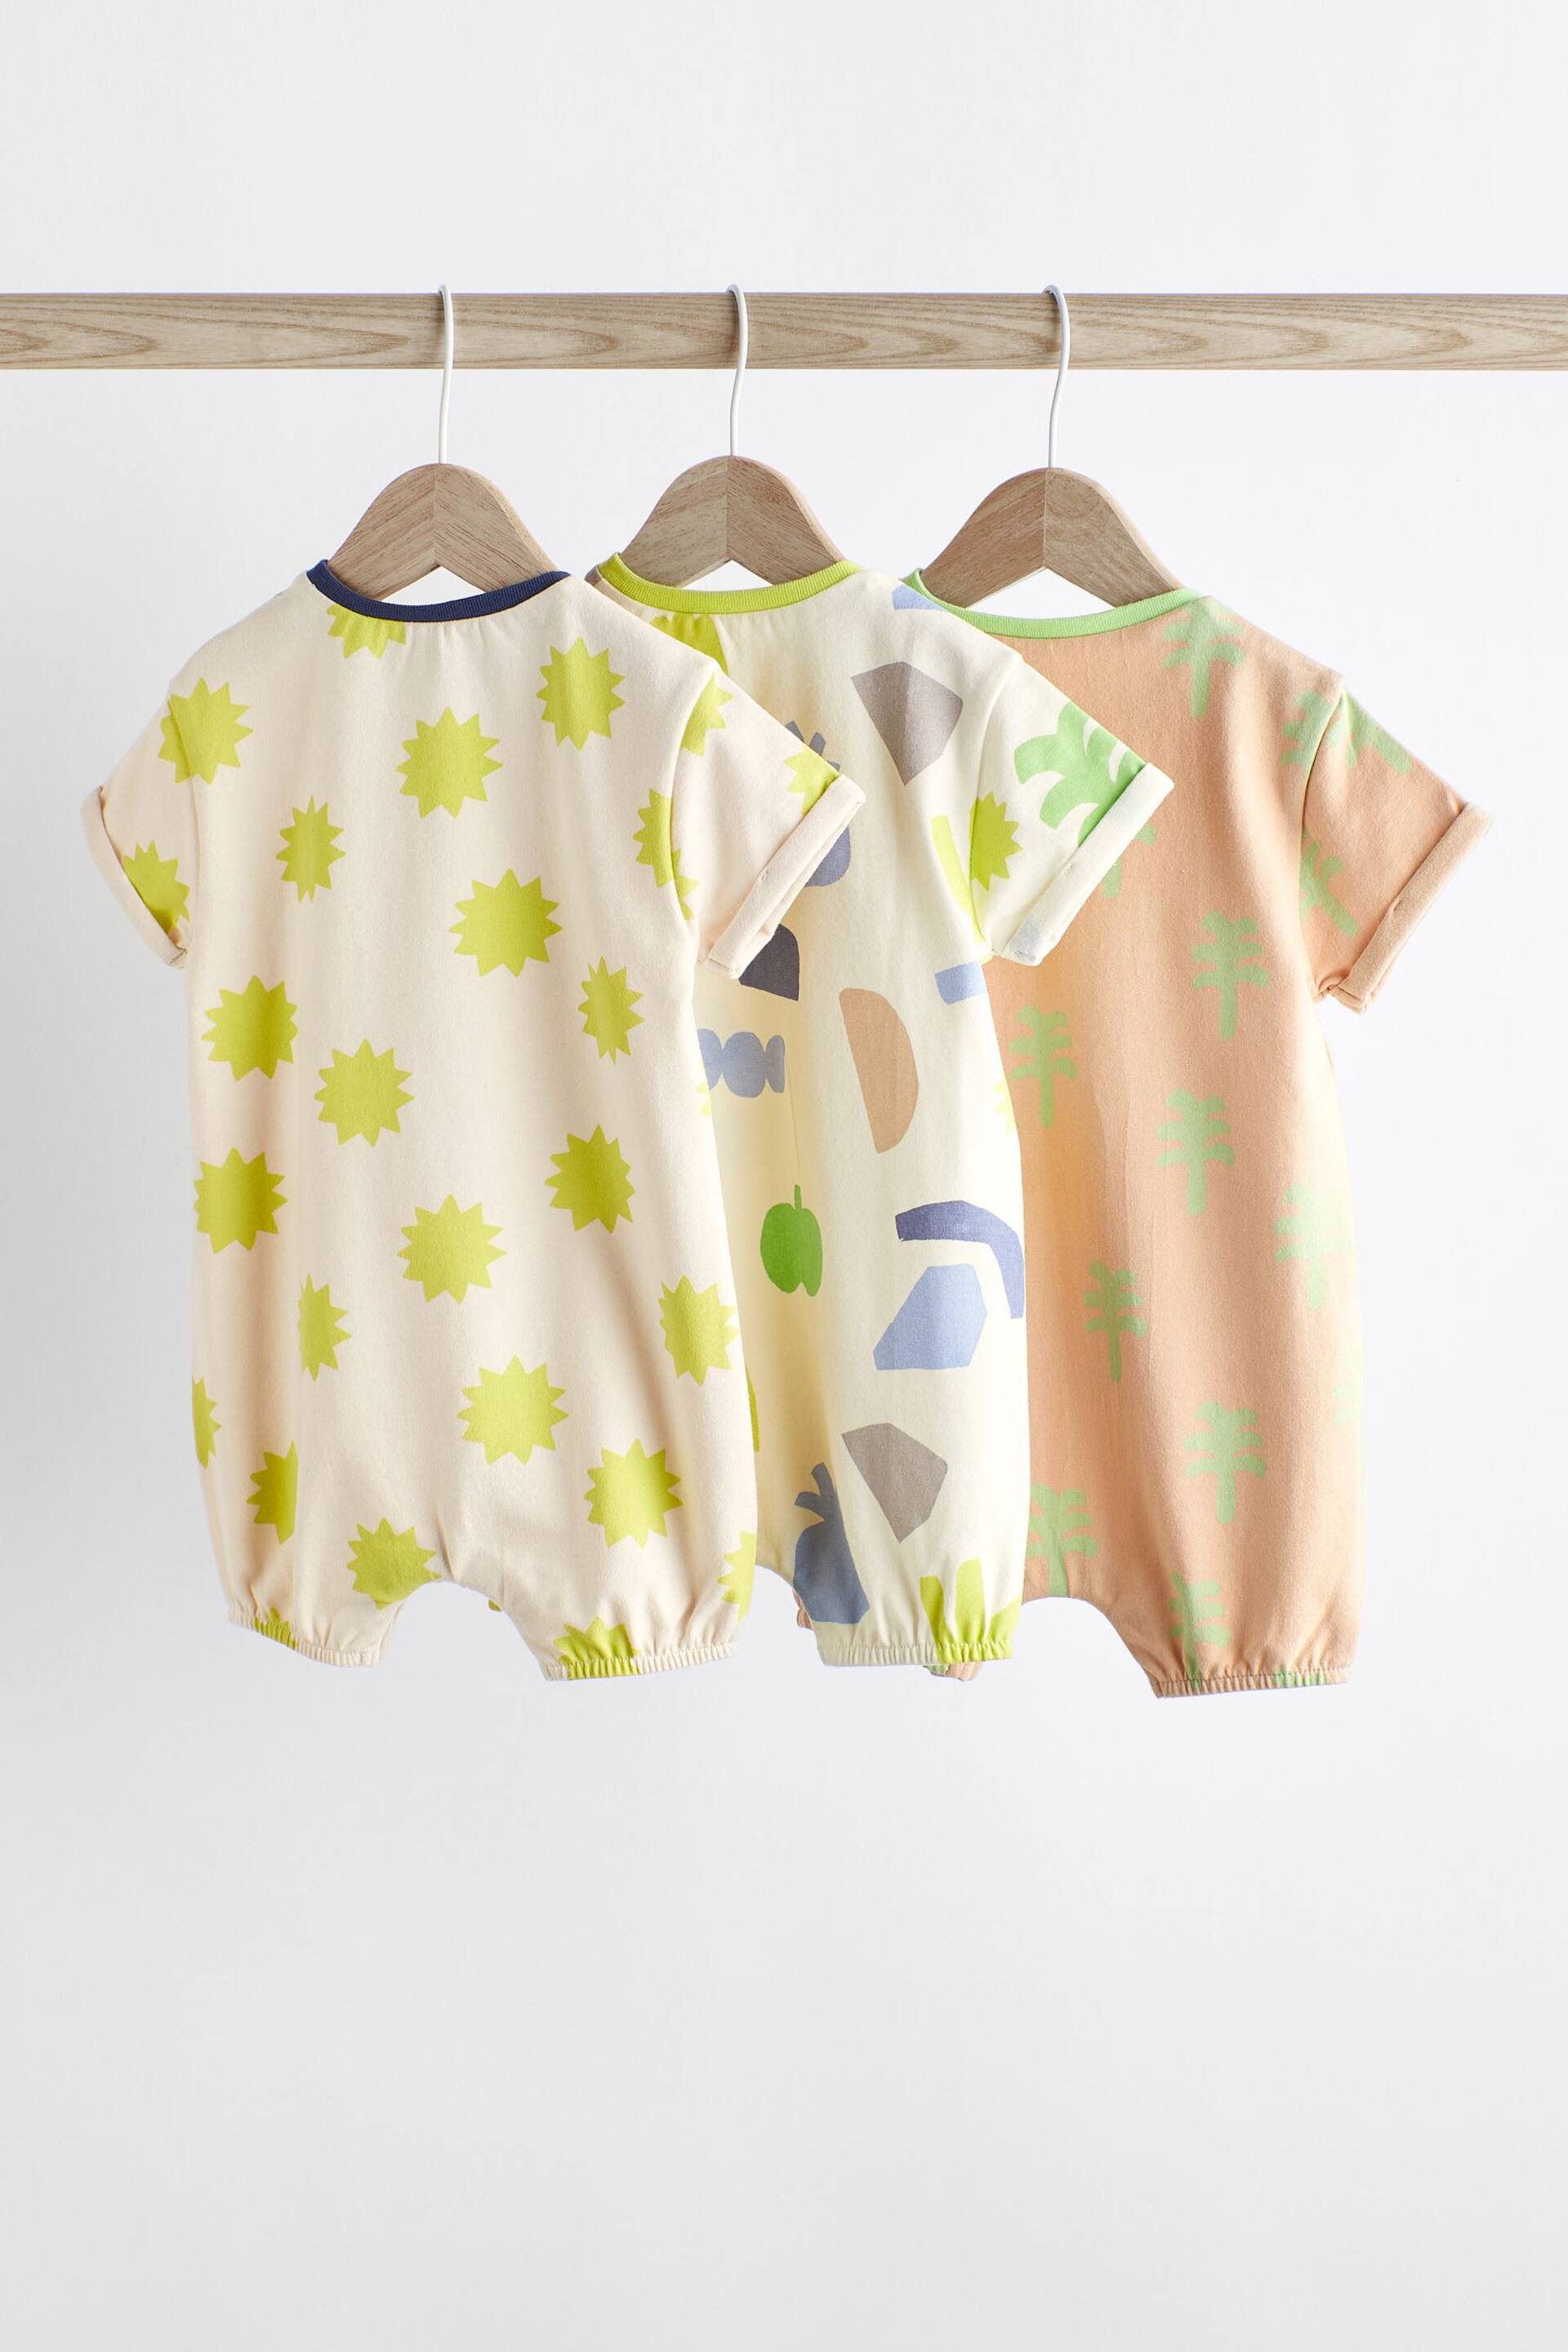 Bright Abstract Baby Jersey Rompers 3 Pack - Image 2 of 6